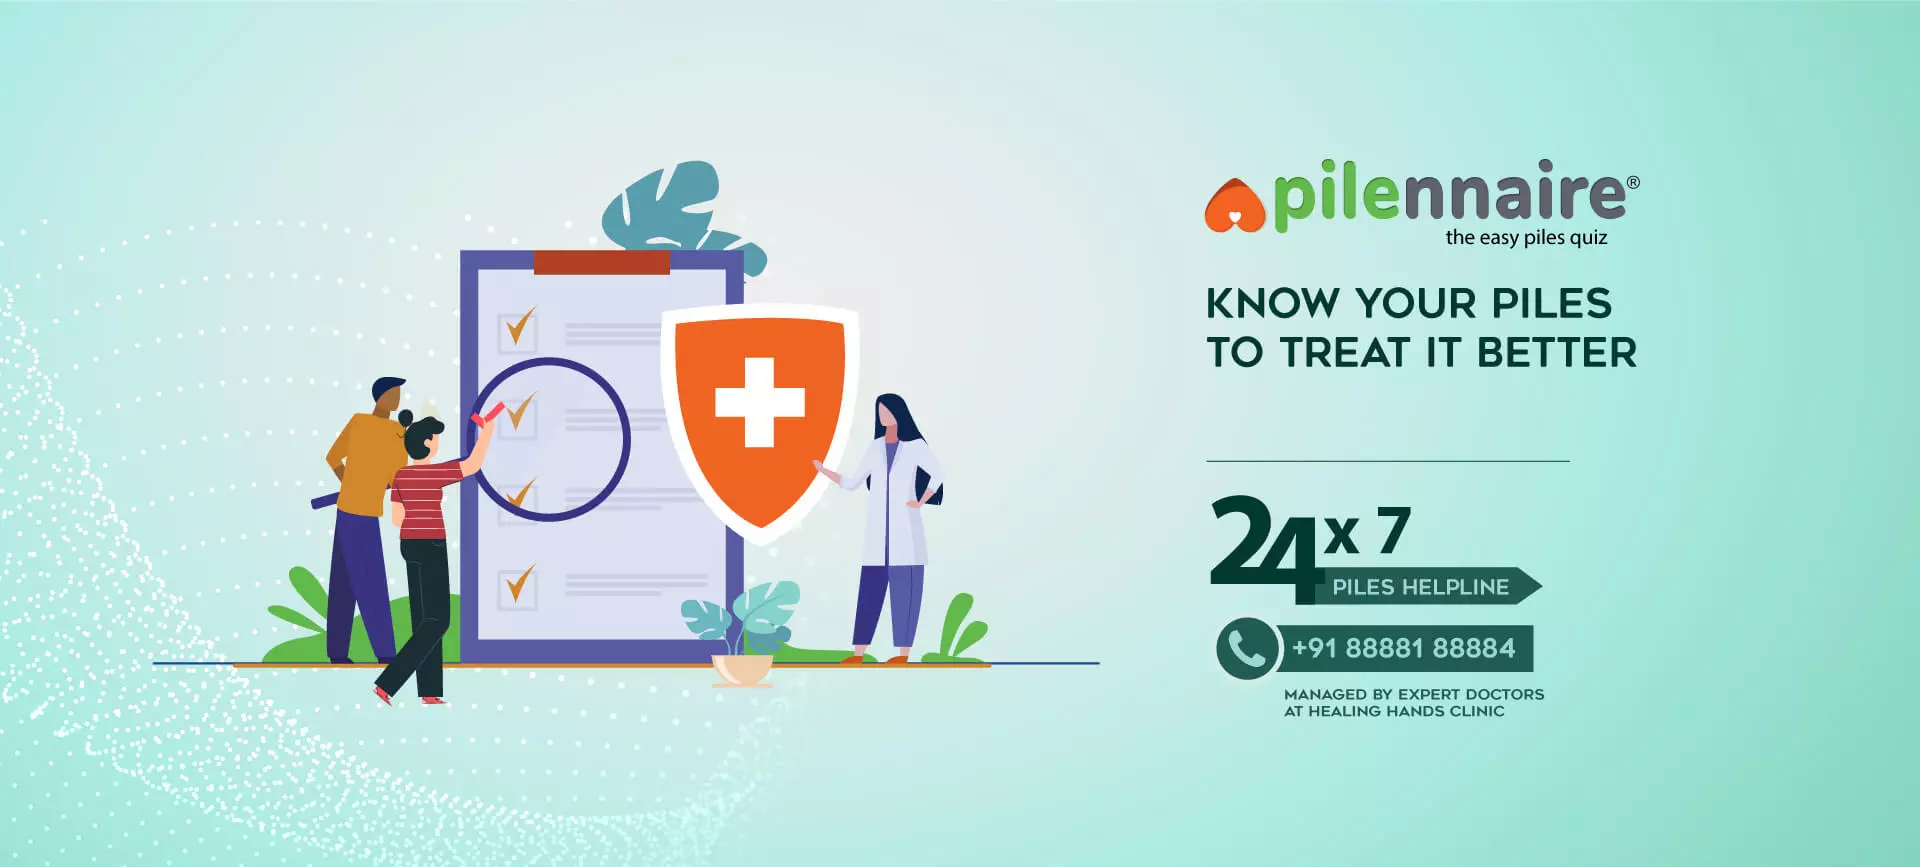 Pilennaire - The Easy Piles Quiz helps you understand your Piles and Fissure to treat it better - Homepage Banner Desktop